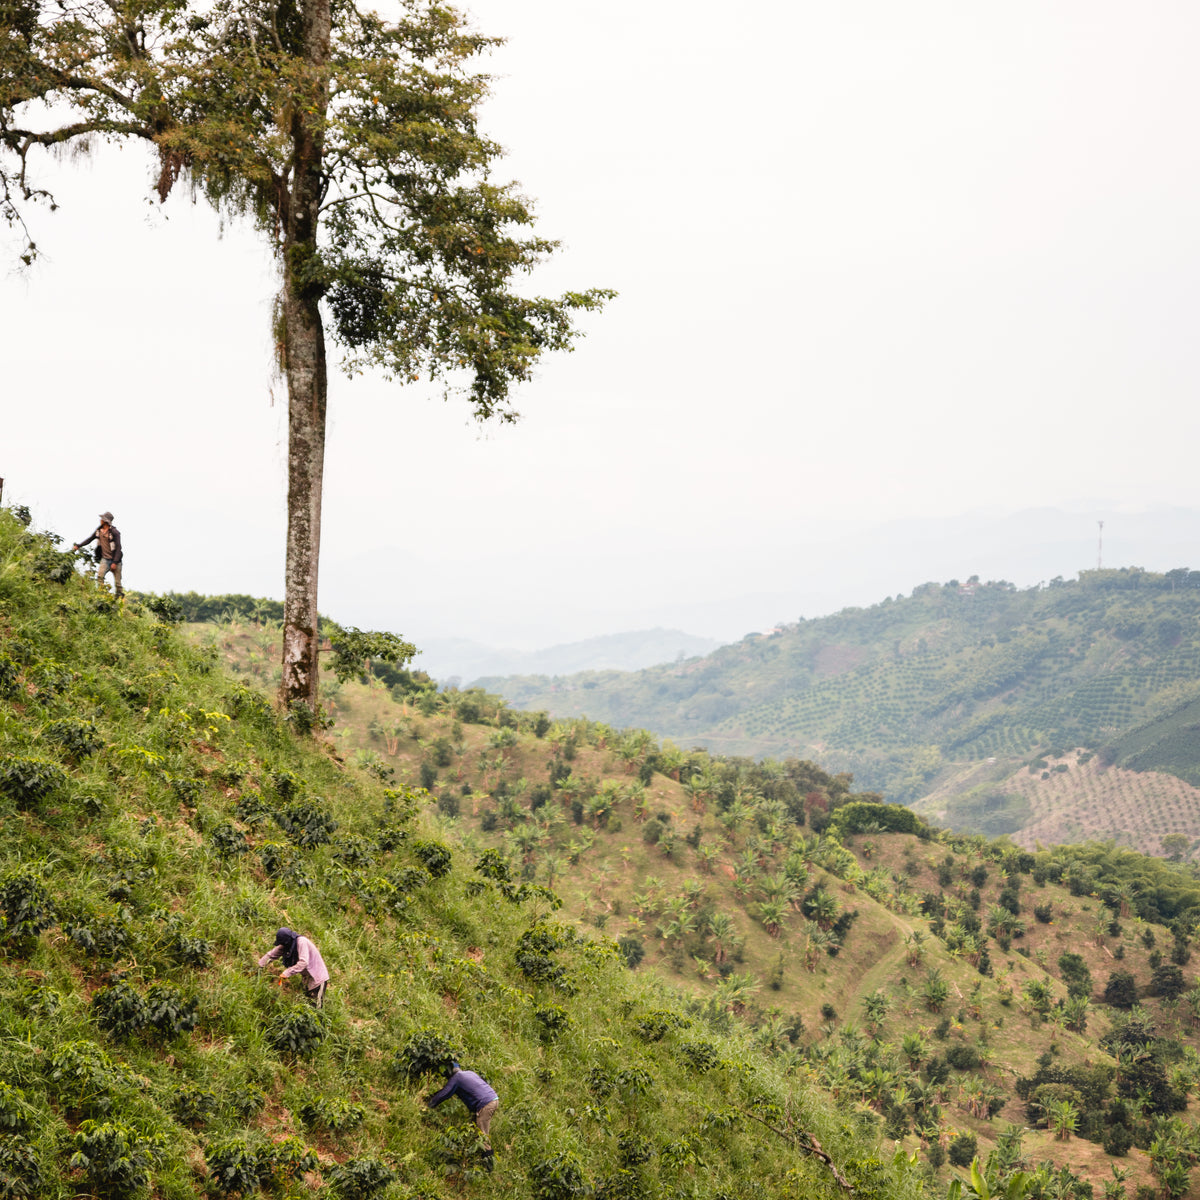 Male and female Colombian coffee farmers in the hills of Armenia, Colombia harvesting ripe coffee beans on a green hill supplying Lost Coffee in Colorado 